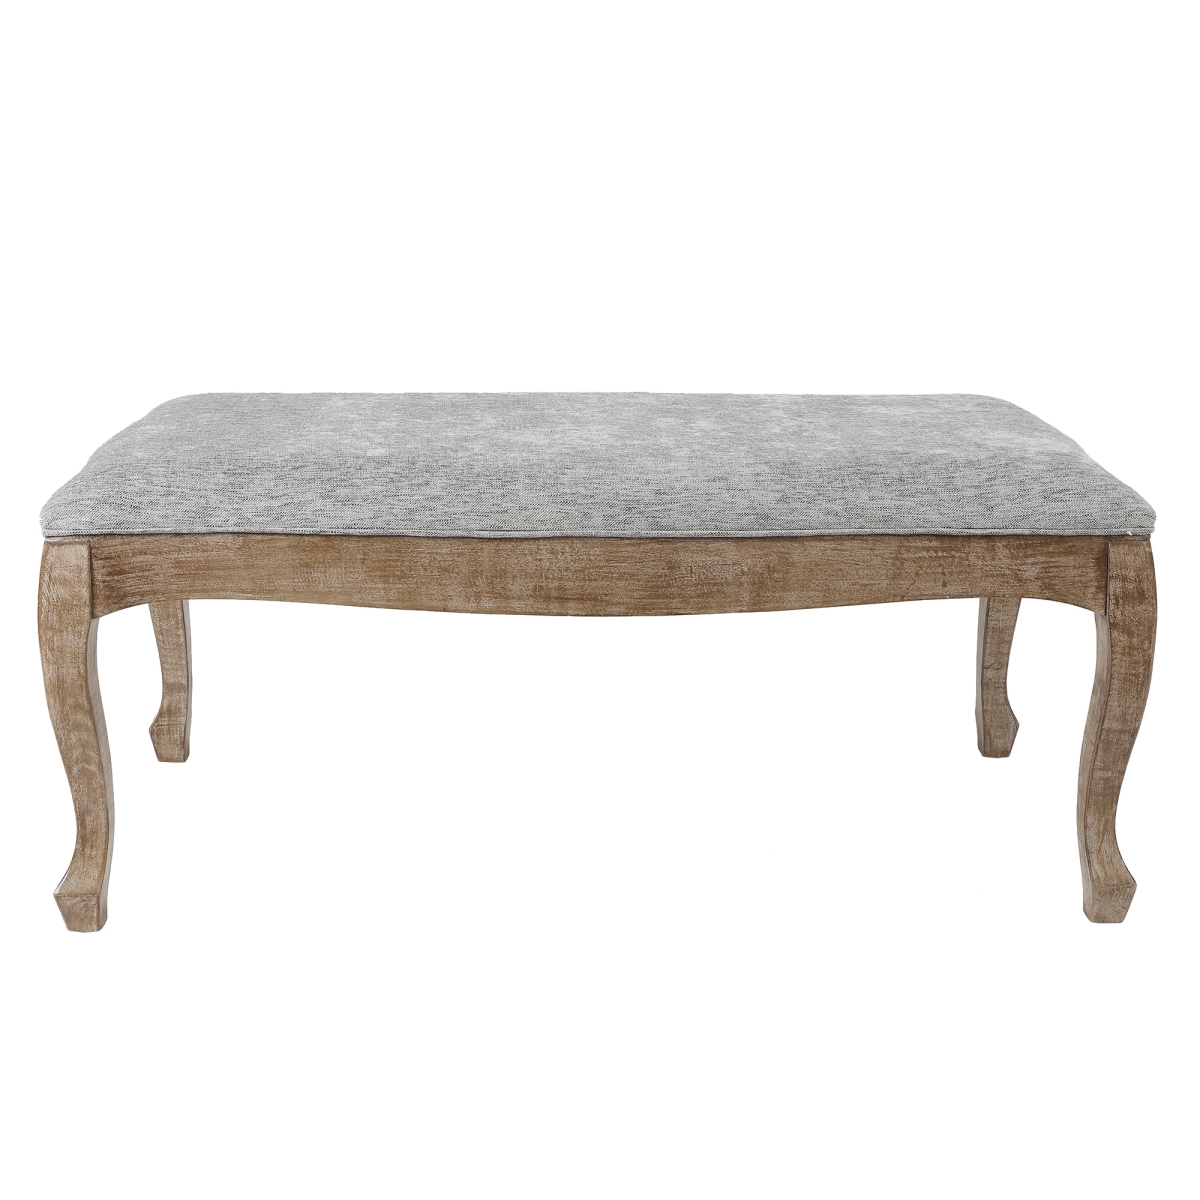 Whif1005 41.25 X 18.25 X 20 In. Upholstered Gray Linen Entryway & Bedroom Bench